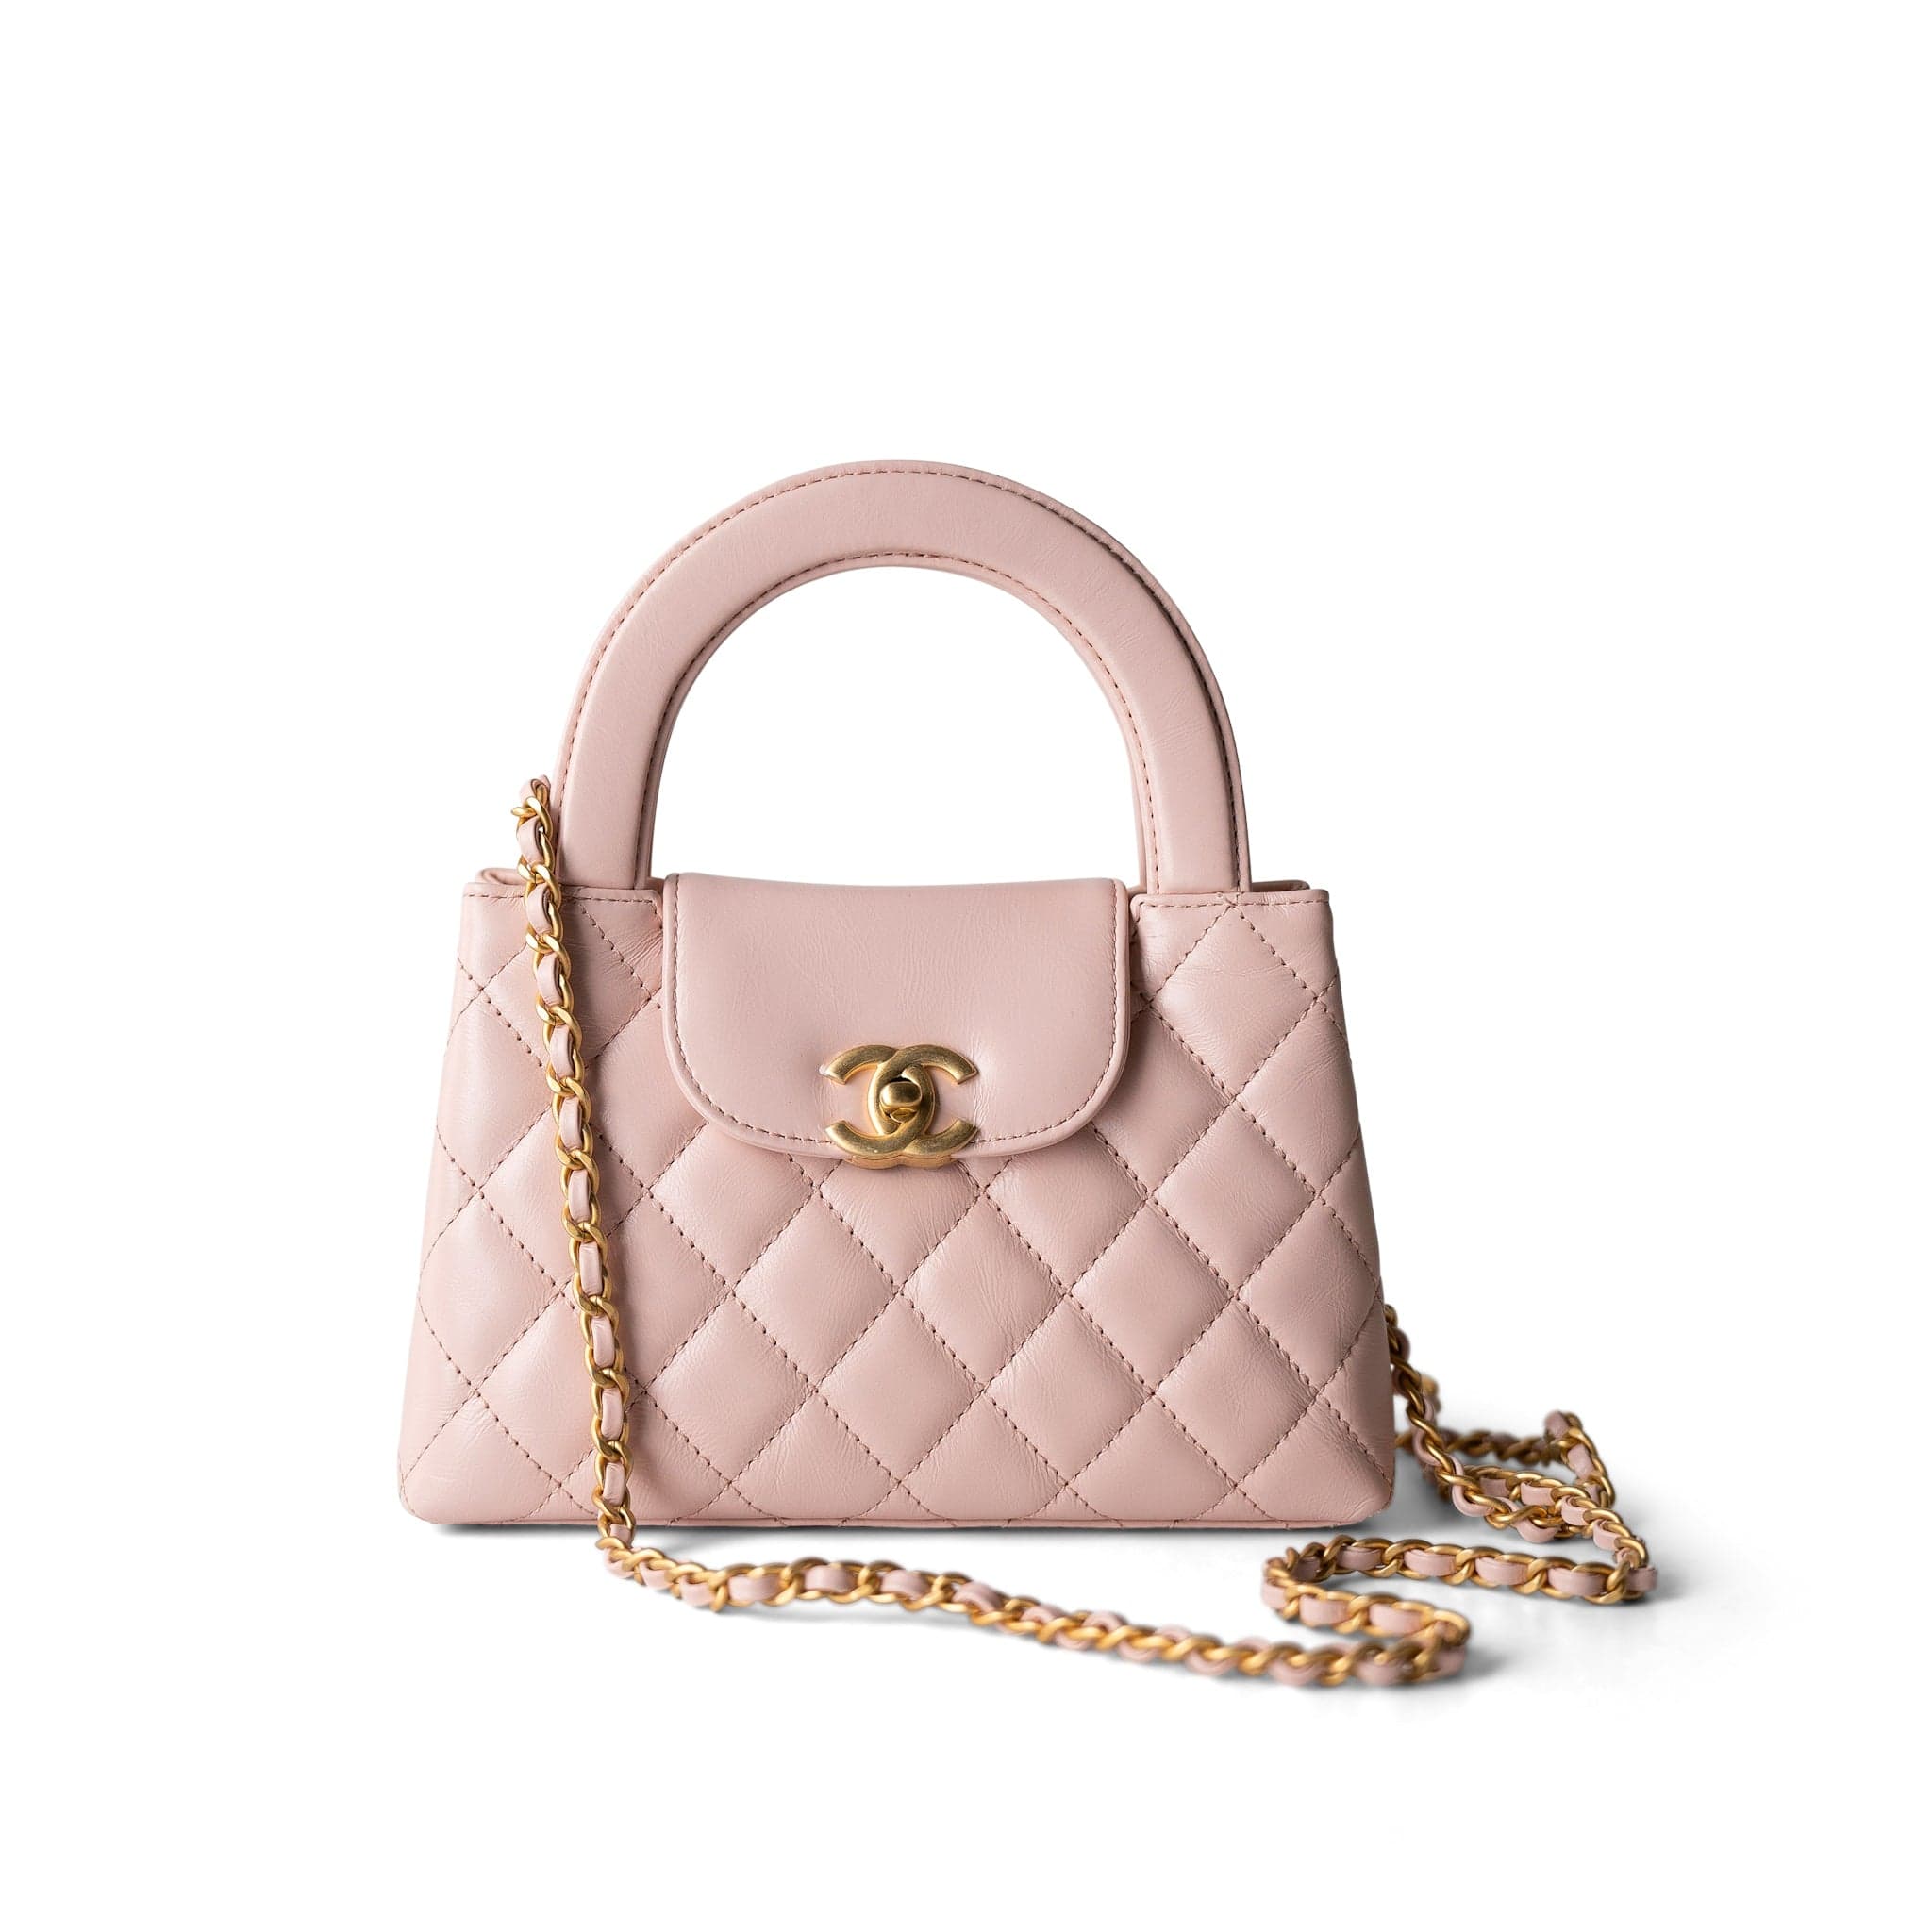 CHANEL Handbag Pink Shiny Aged Calfskin Quilted Nano Kelly Shopper Light Pink - Redeluxe